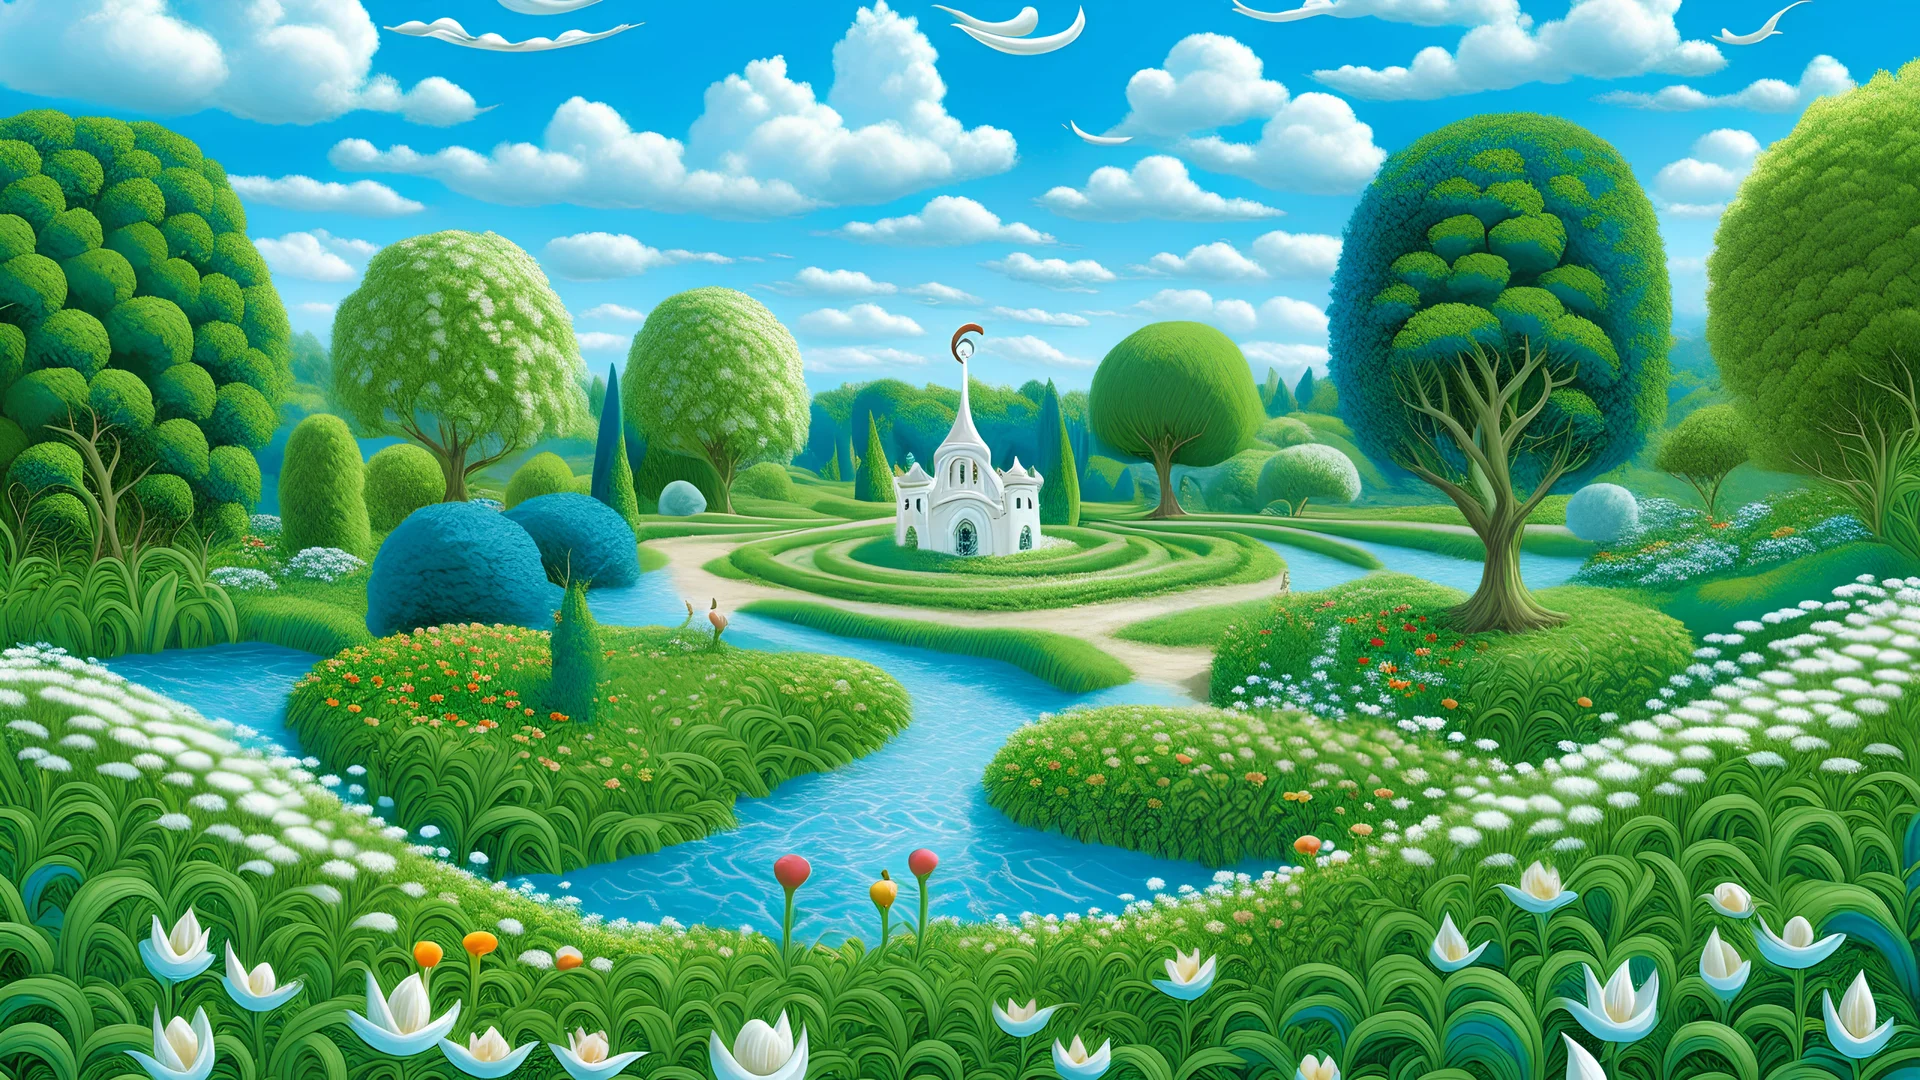 A garden with a labyrinthine layout of hedges and paths, with white swans swimming in ponds. The background features a blue sky with fluffy white clouds and trees in various shades of green. The overall scene has a whimsical, dreamlike quality.